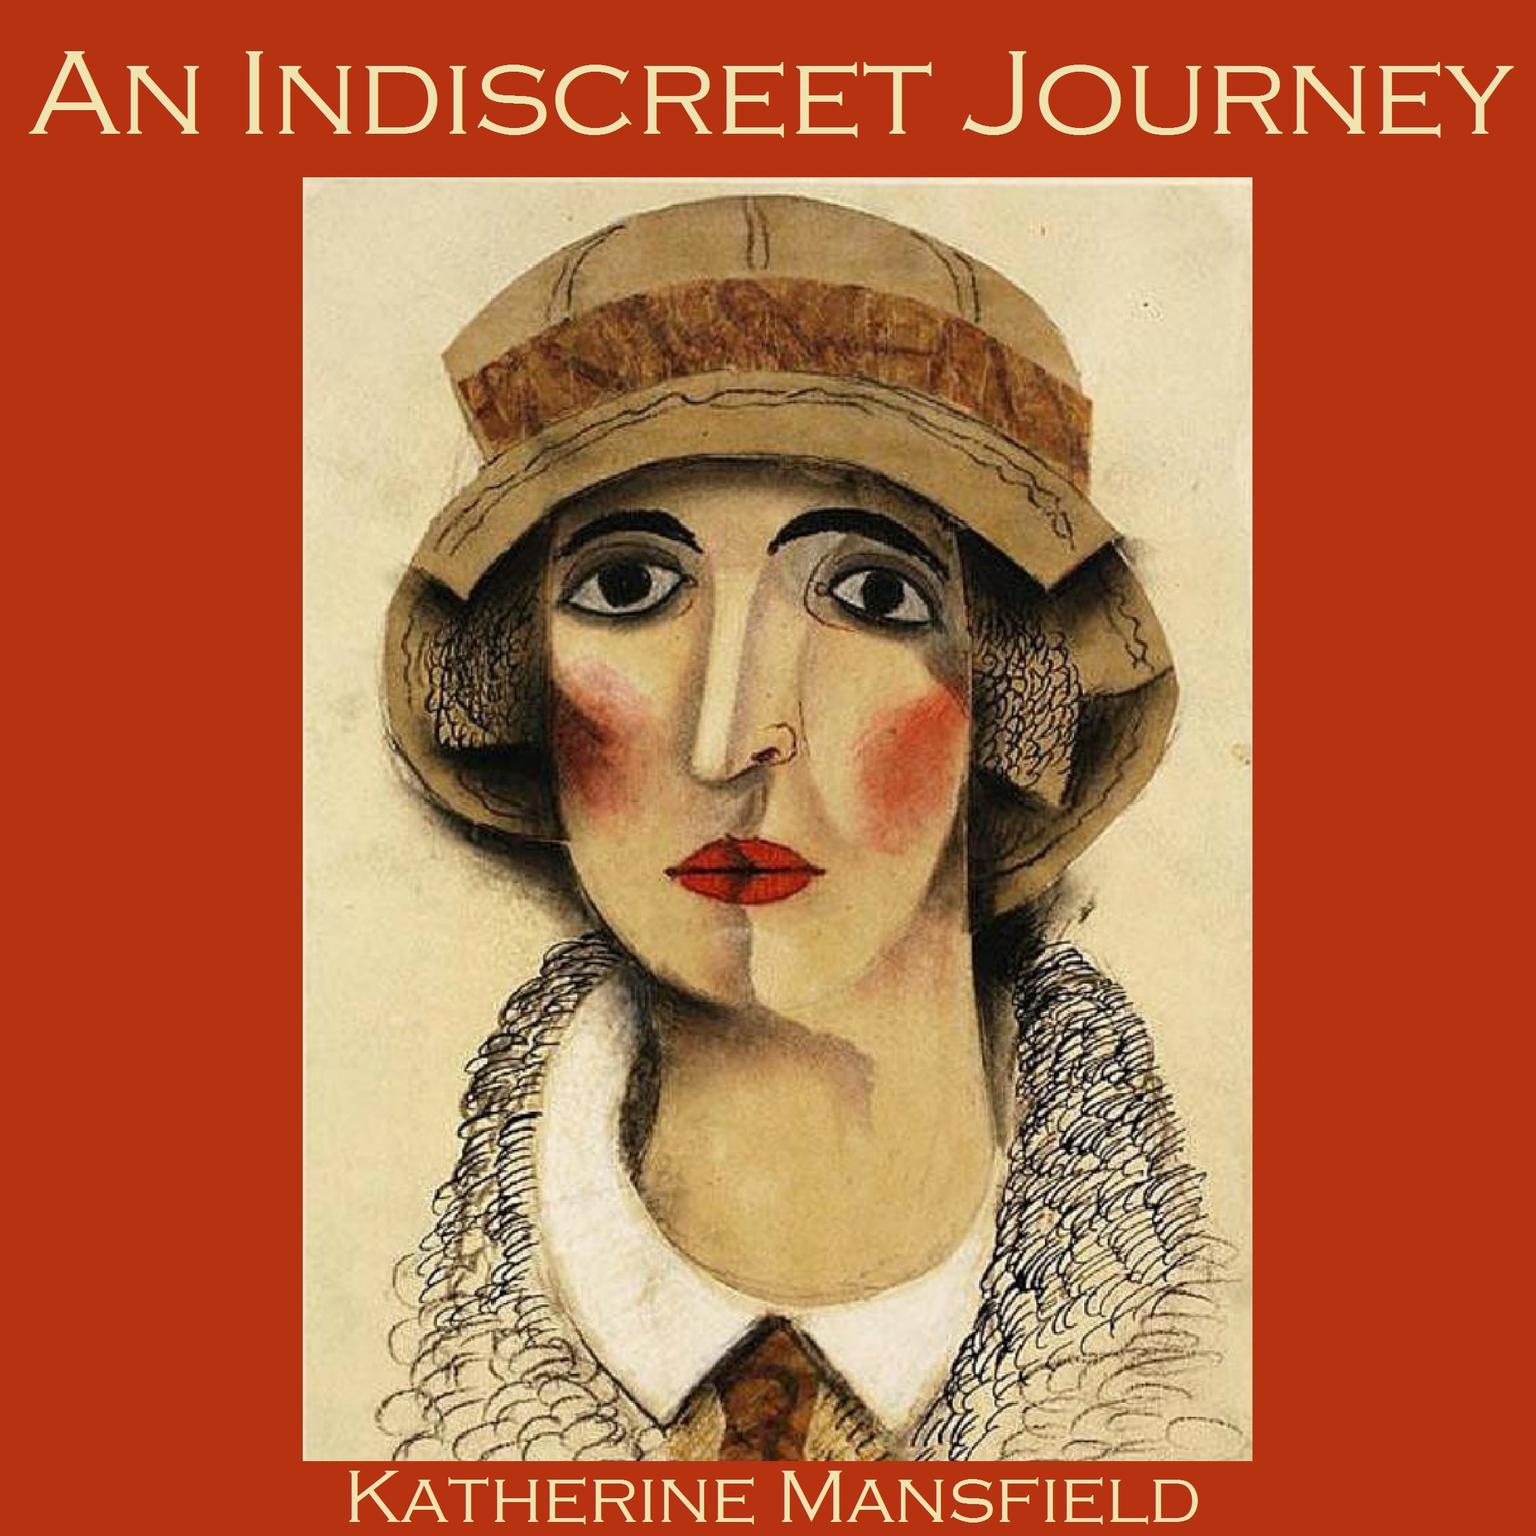 An Indiscreet Journey Audiobook, by Katherine Mansfield